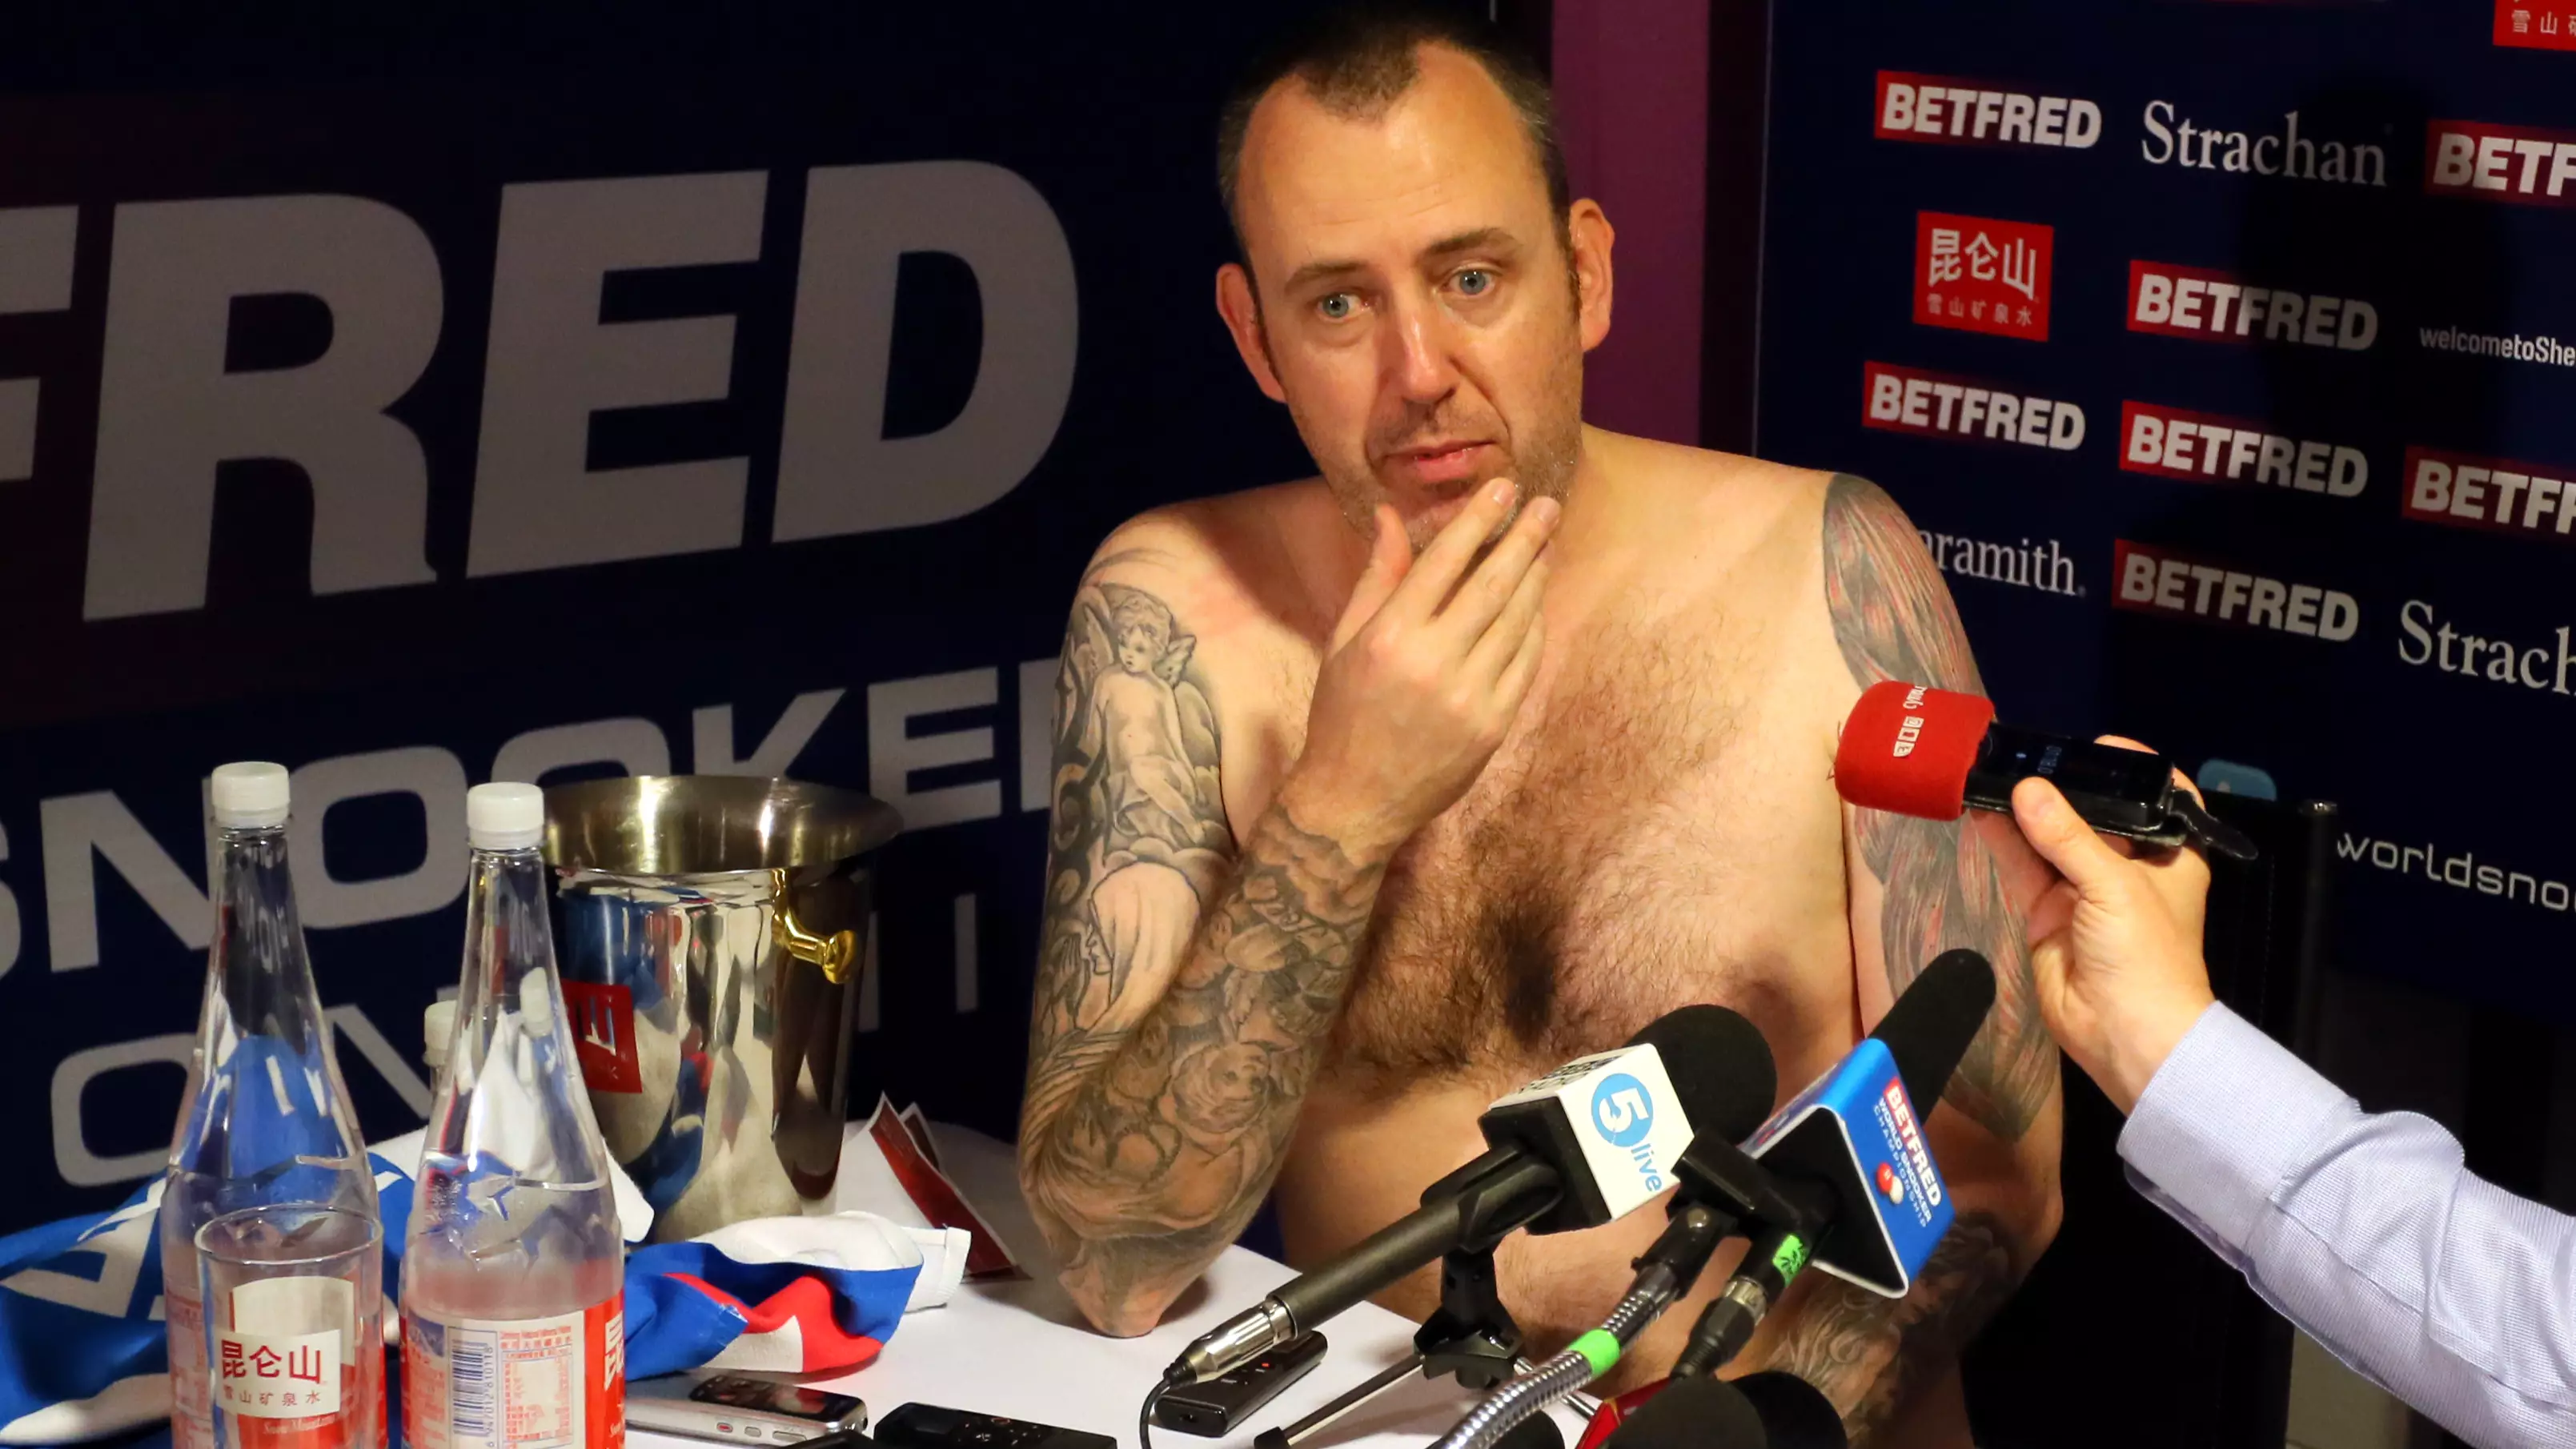 World Snooker Champ Mark Williams Turns Up To Press Conference Naked